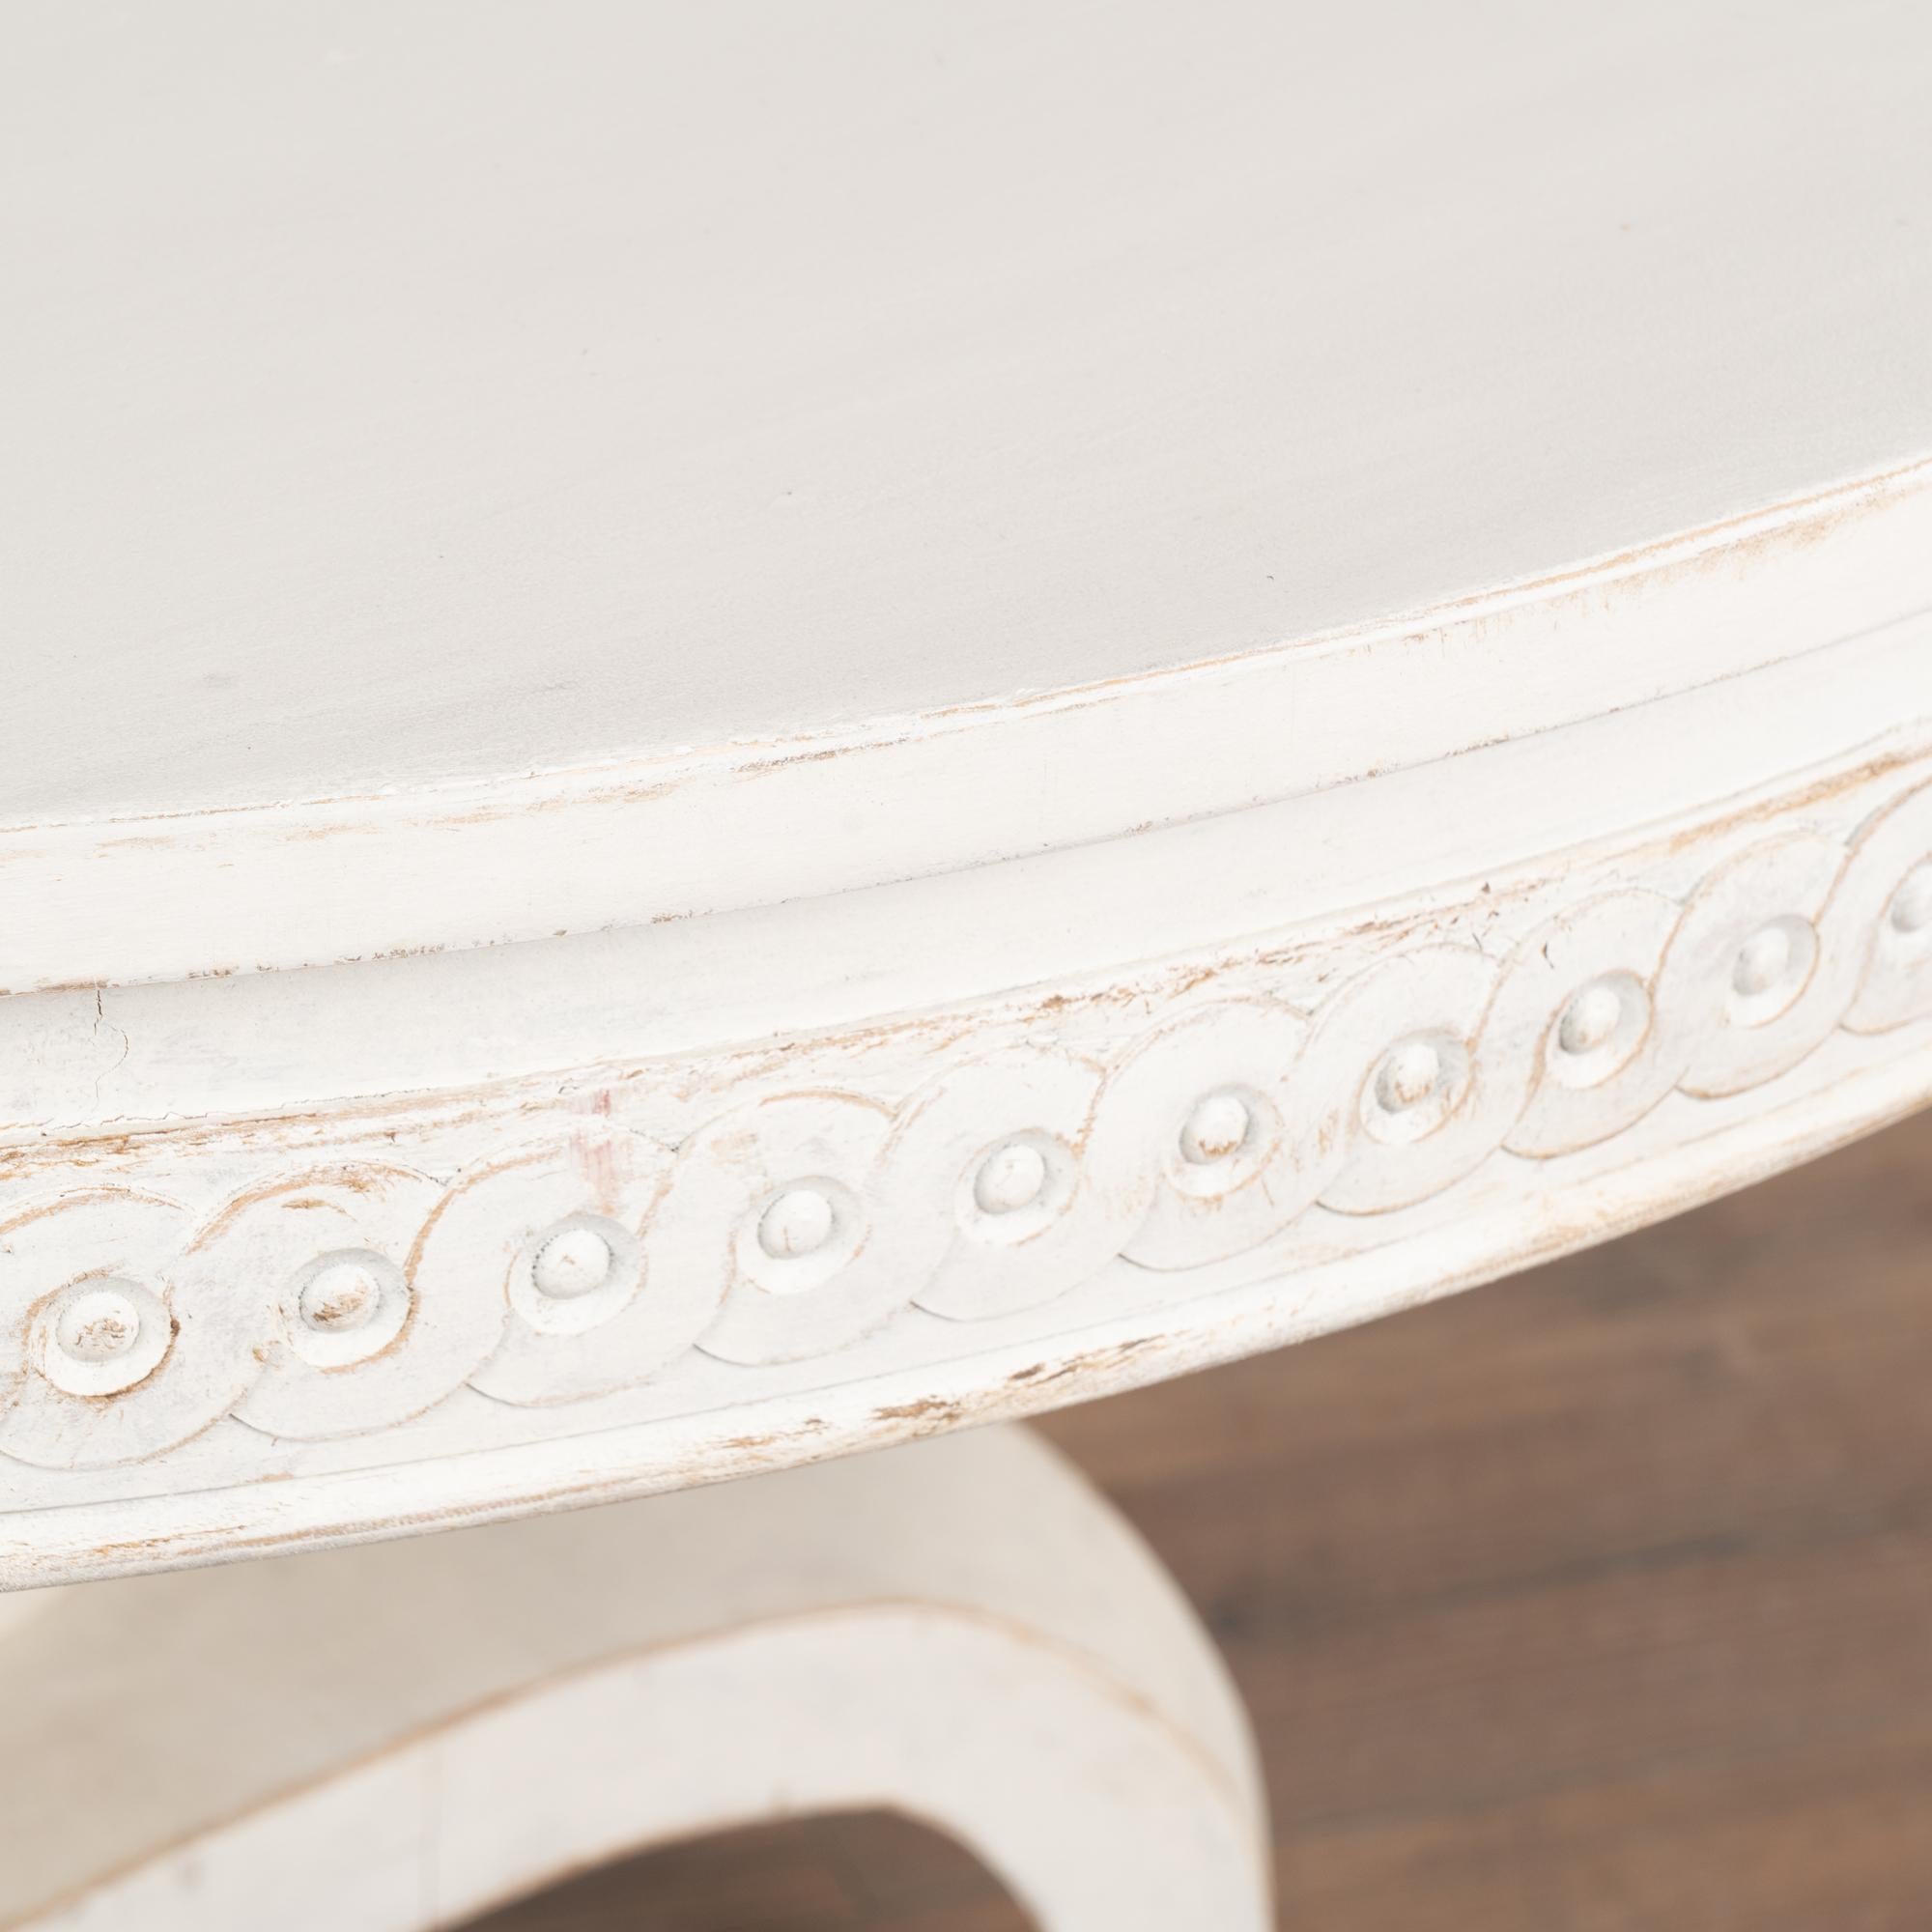 Large 5' Round White Painted Pedestal Table, Sweden circa 1920 For Sale 5